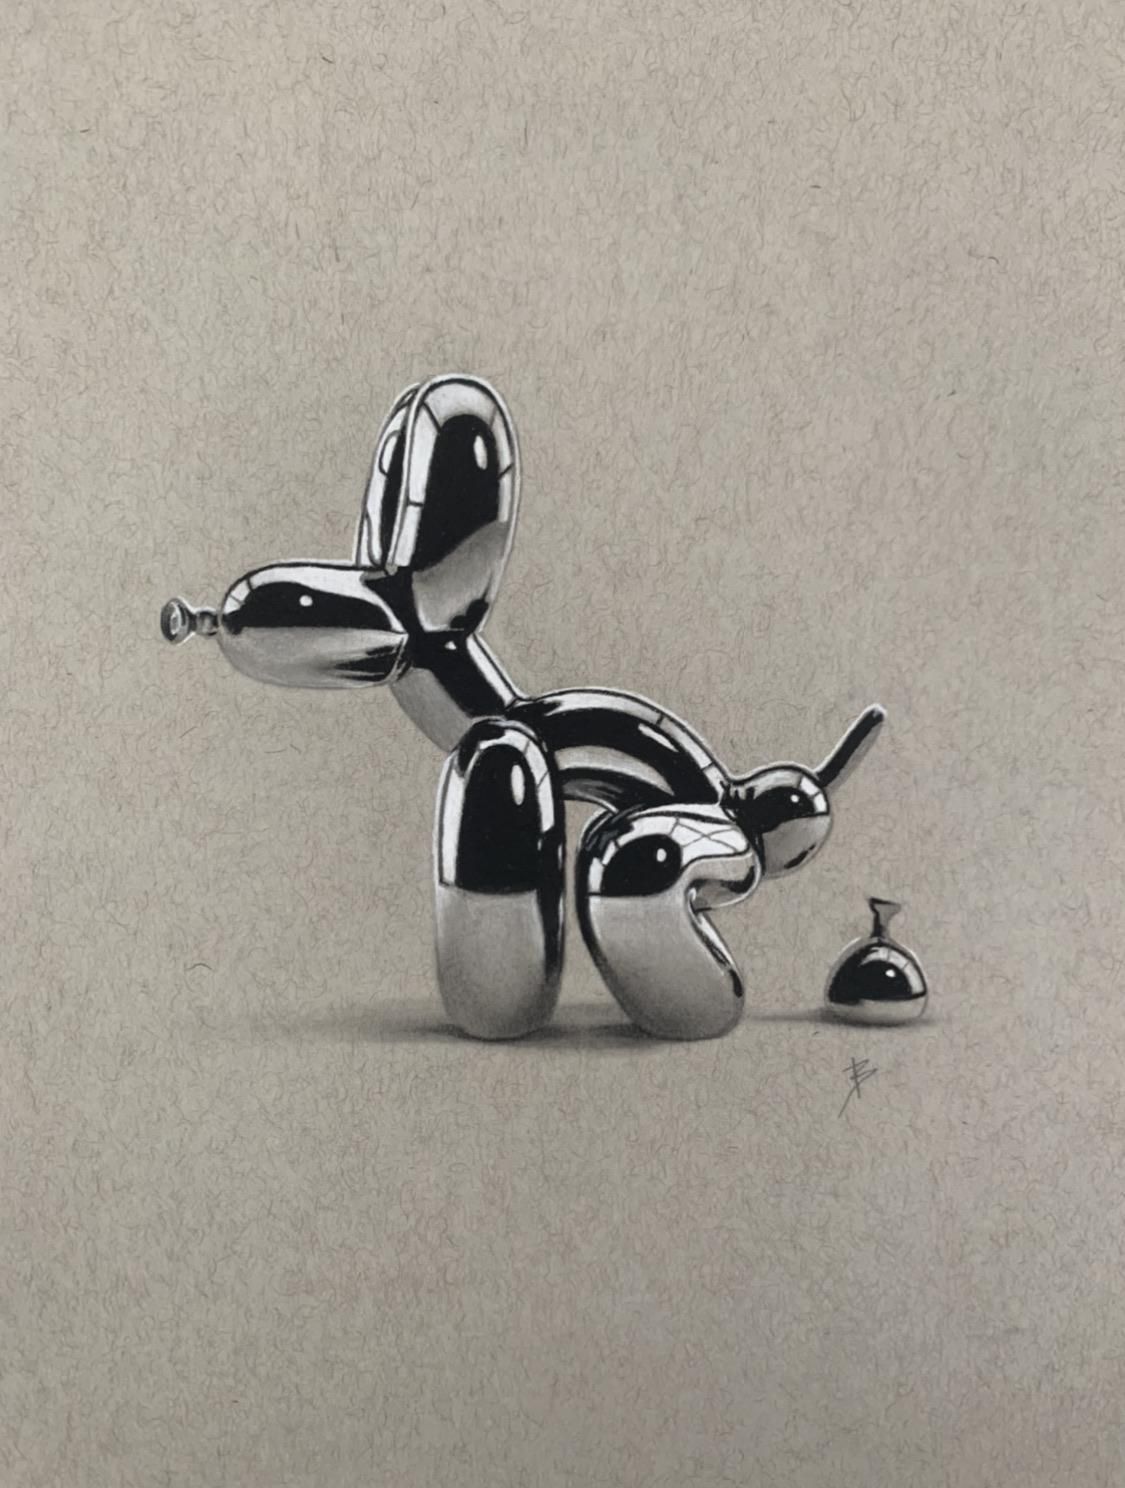 My drawing of a balloon dog poopin